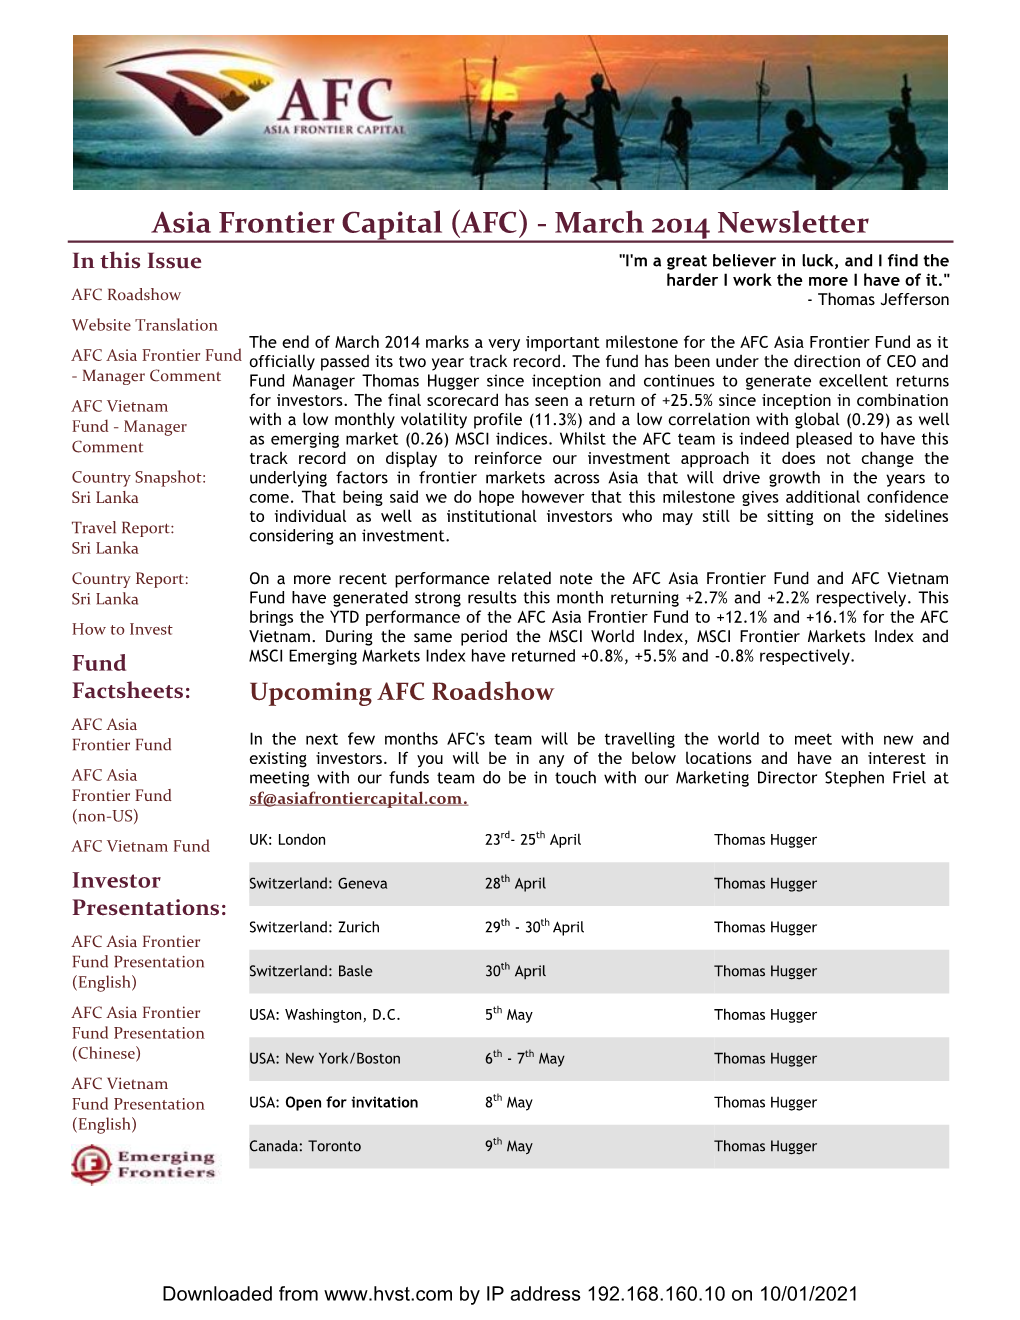 Asia Frontier Capital (AFC)